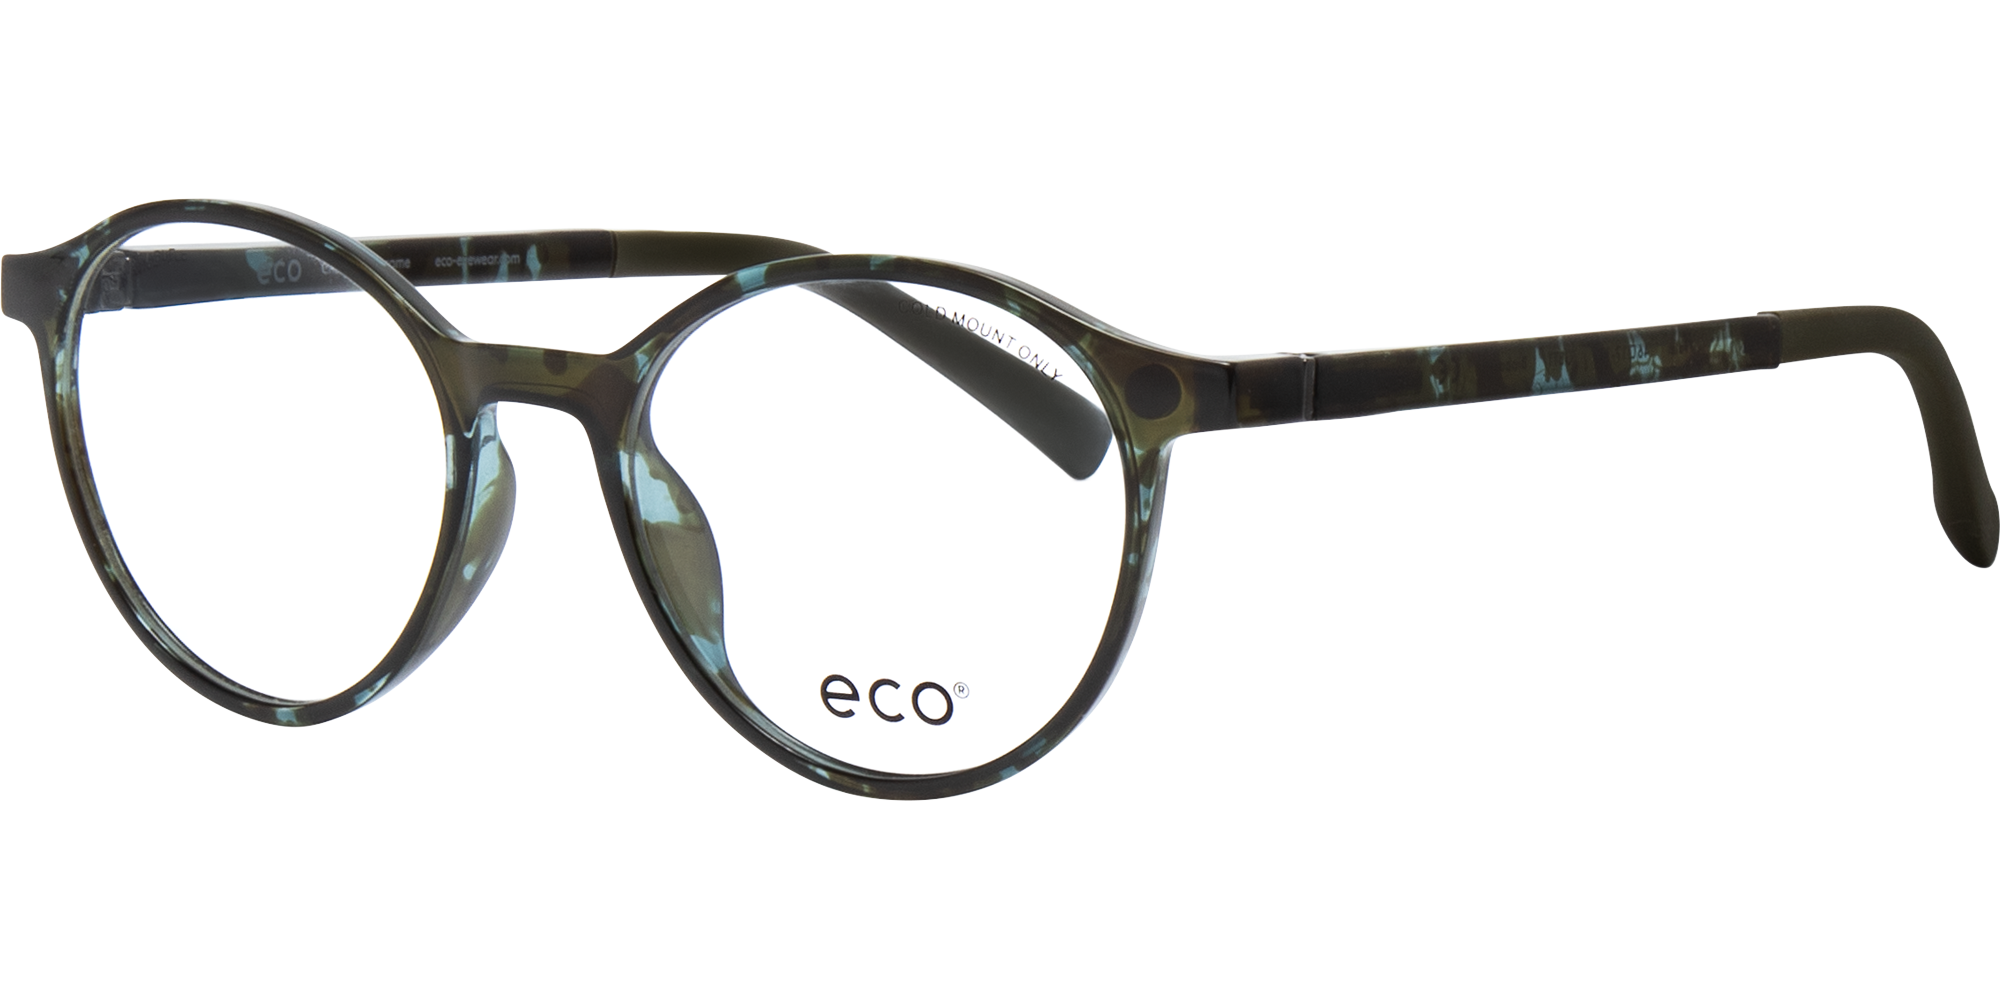 Eco PALM image number null